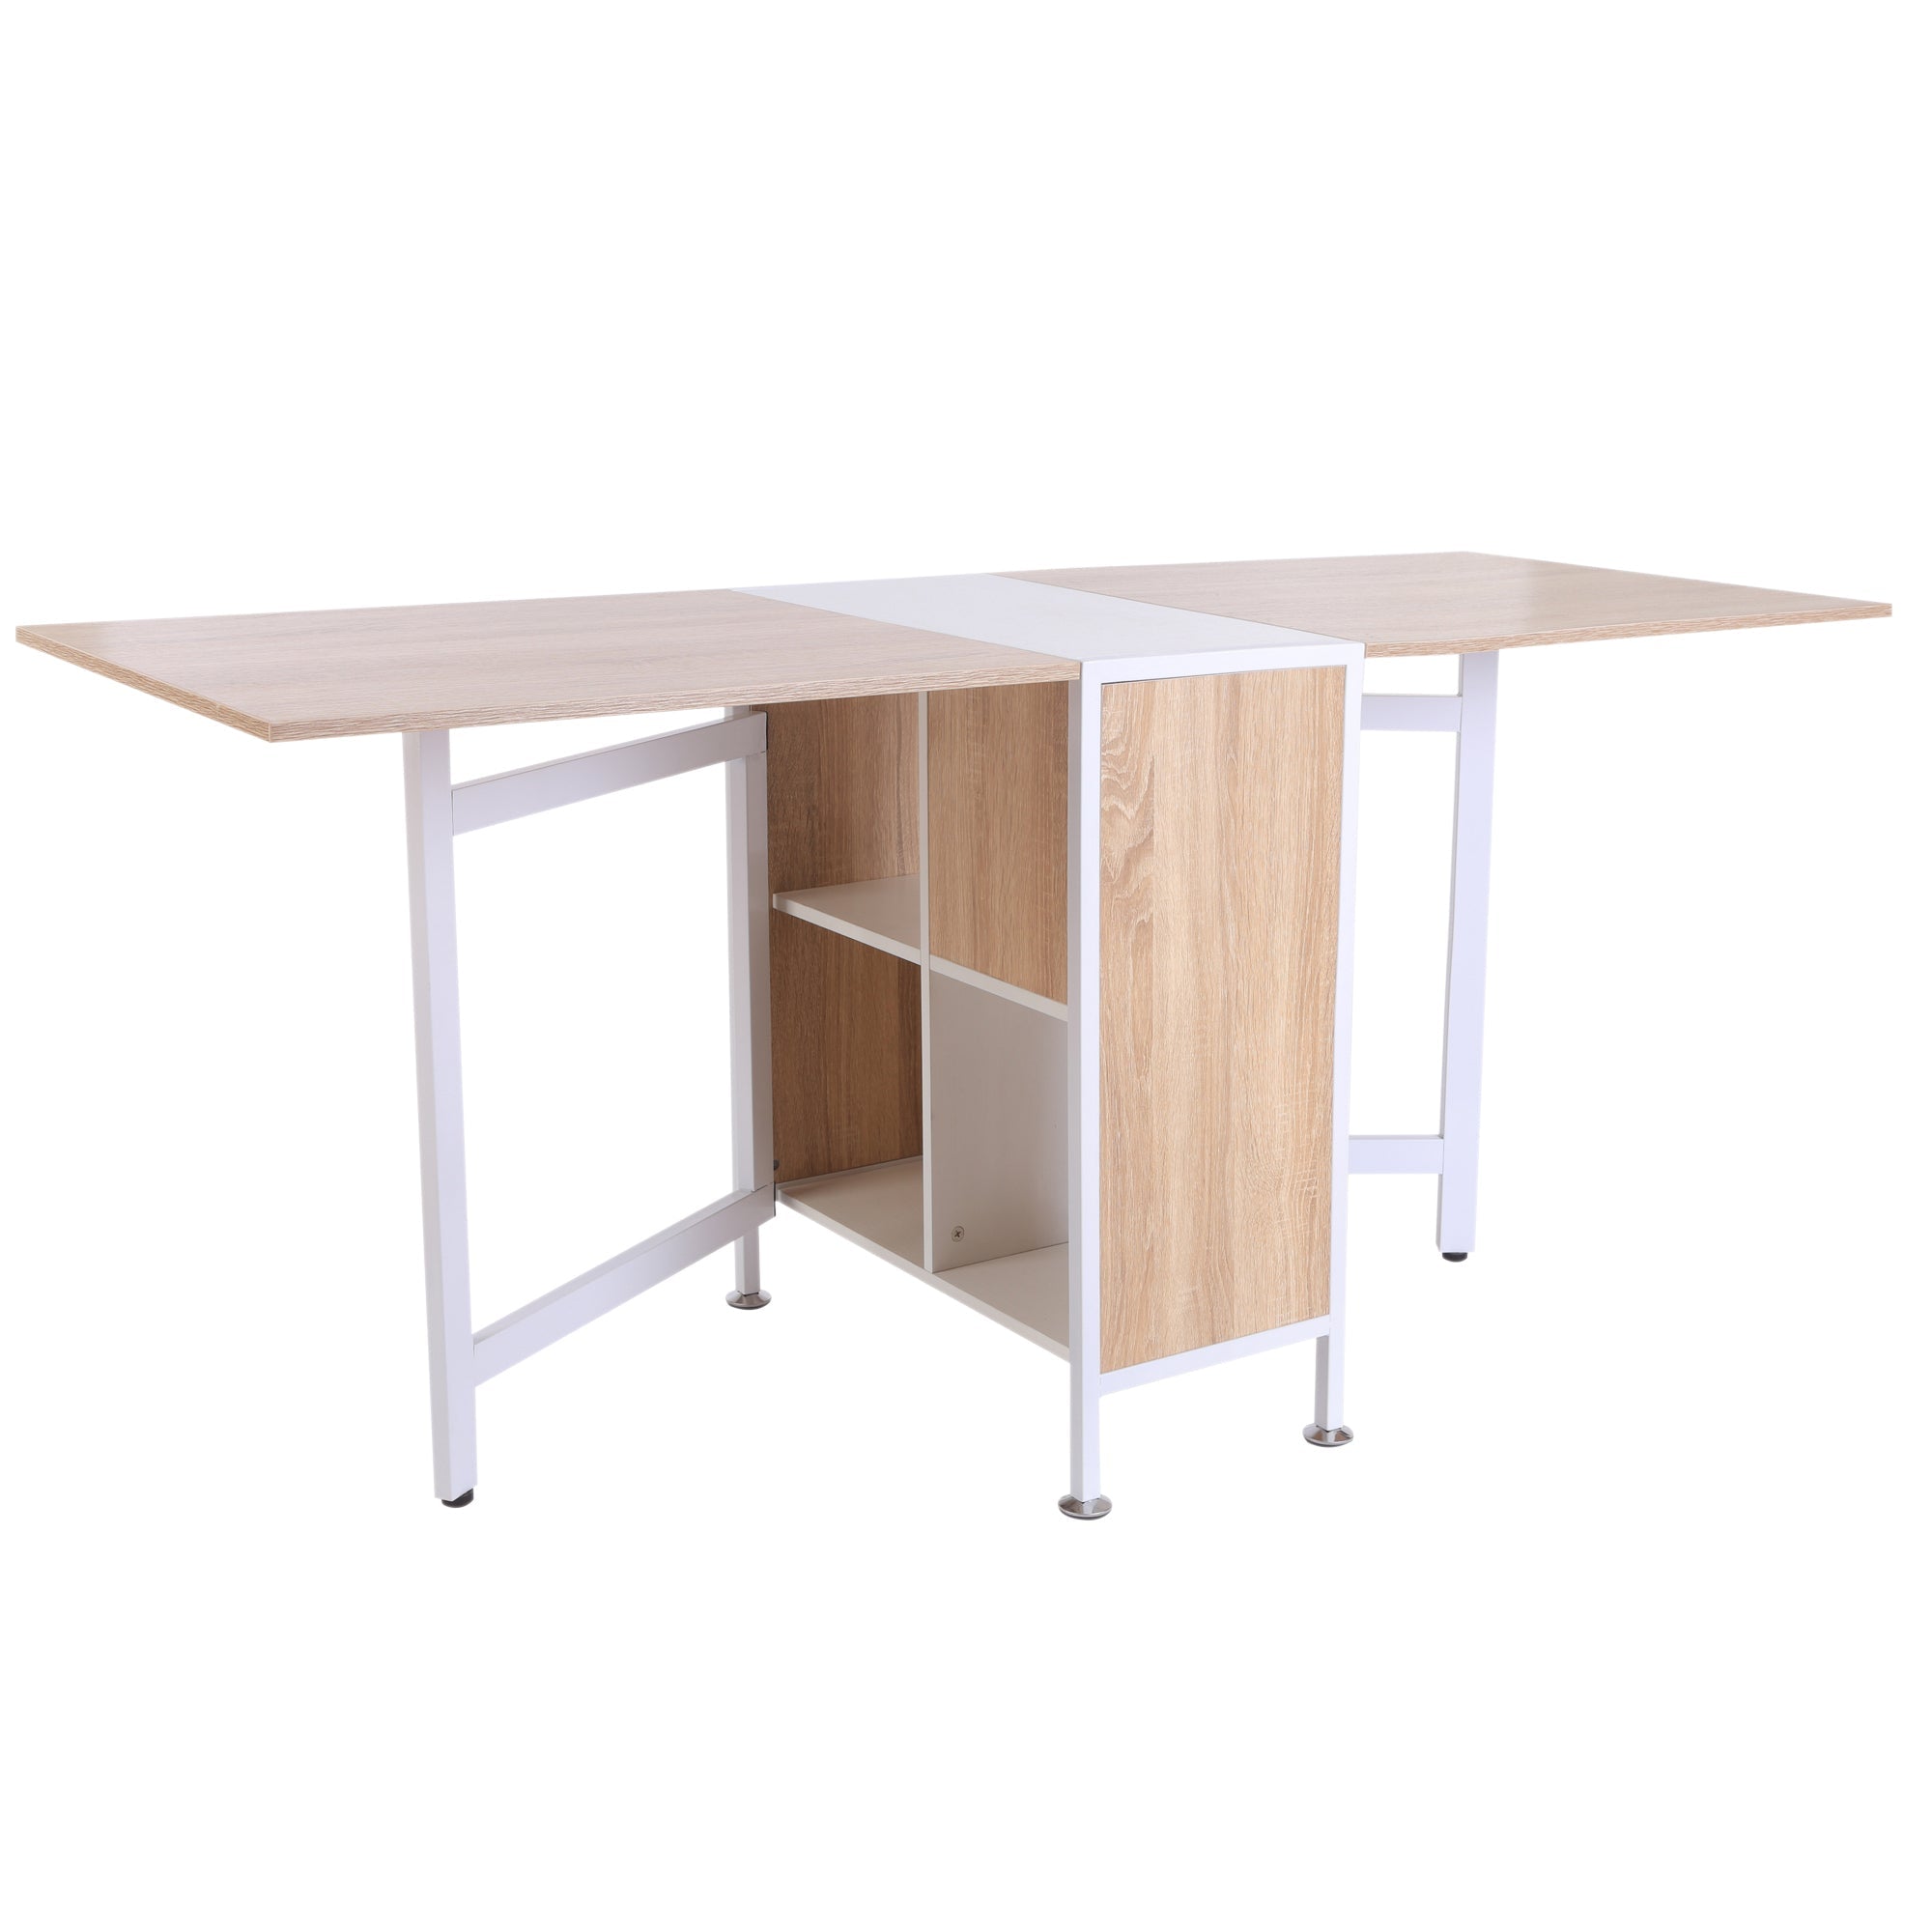 Foldable Dining Table Folding Workstation for Small Space with Storage Shelves Cubes Oak & White-1